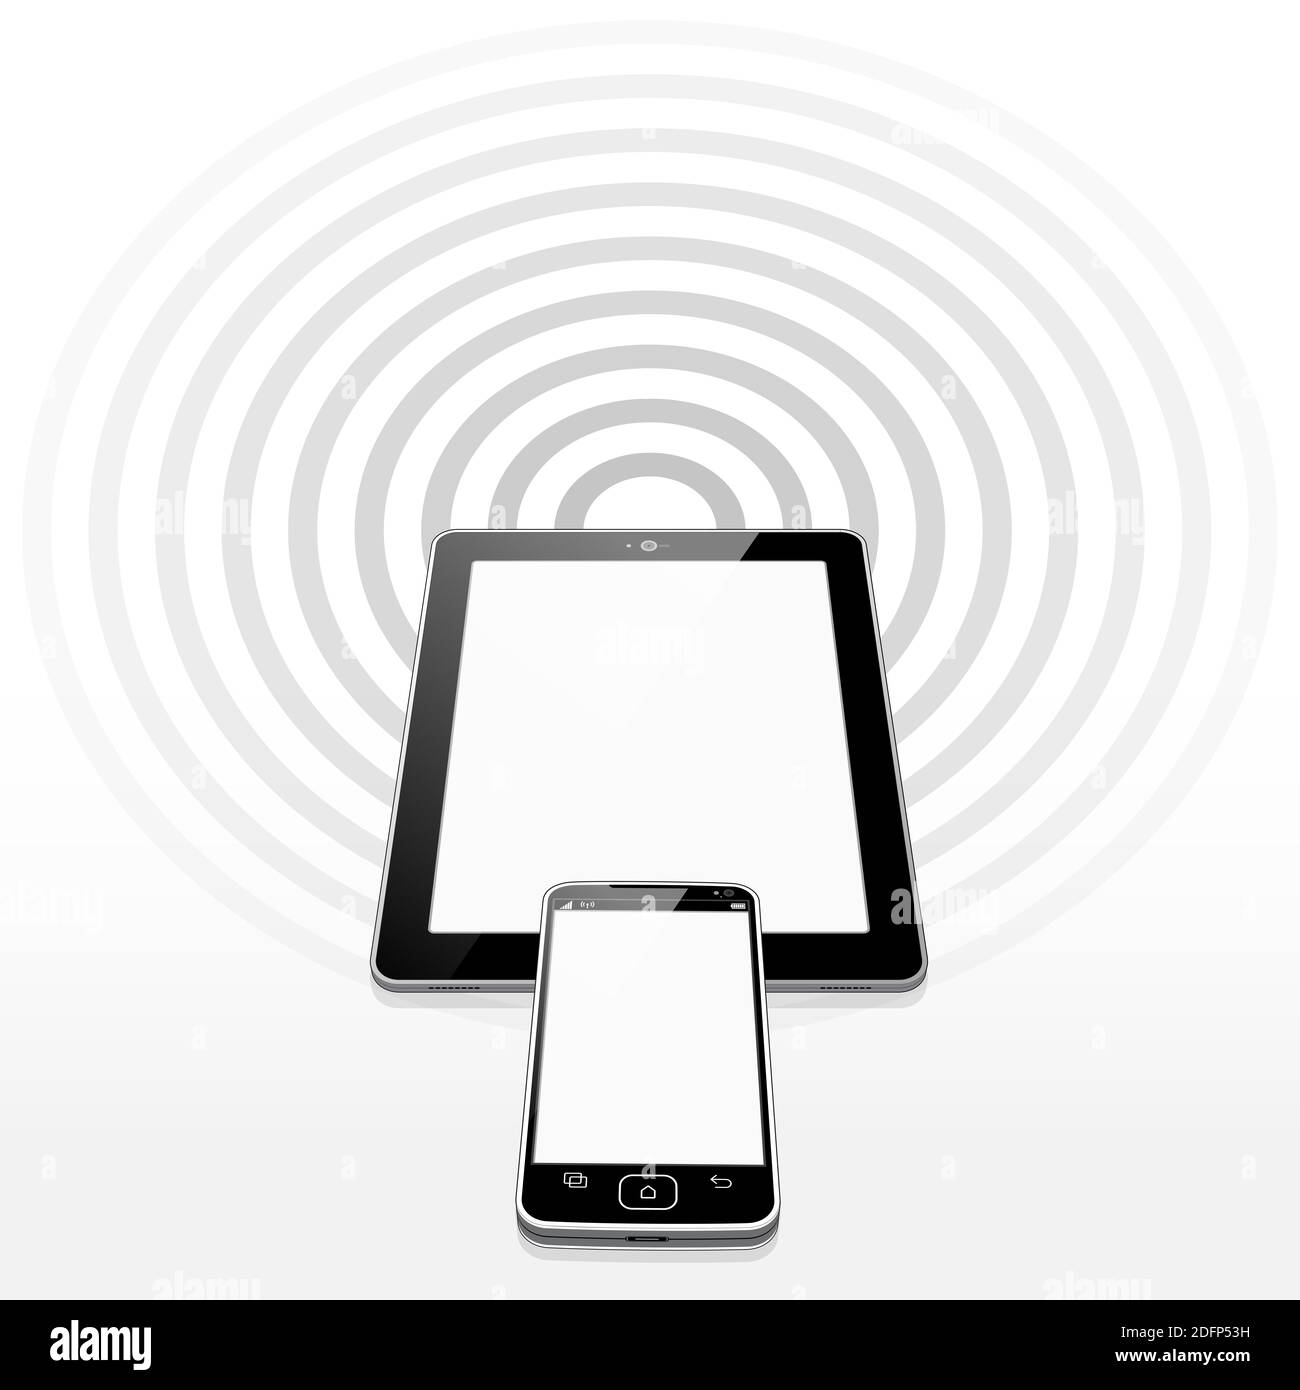 A Smart Phone placed overlapping a Tablet PC device. Emitting from both devices is a strong advanced Wi-Fi signal. Stock Photo